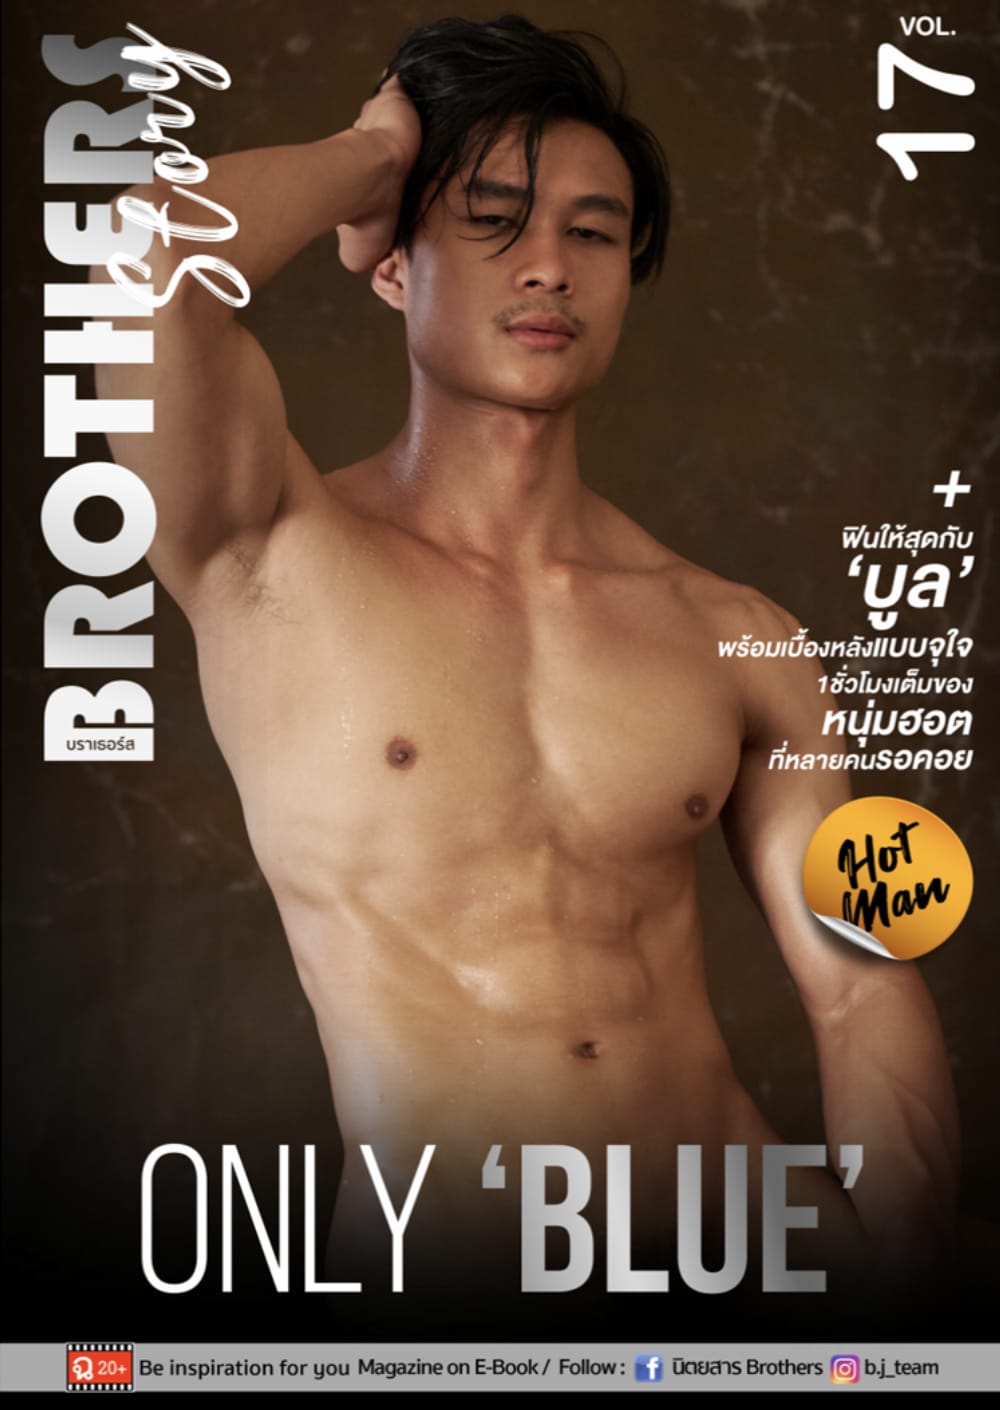 Brothers Story Vol.17 Only Blue ‖ R+【PHOTO+VIDEO】